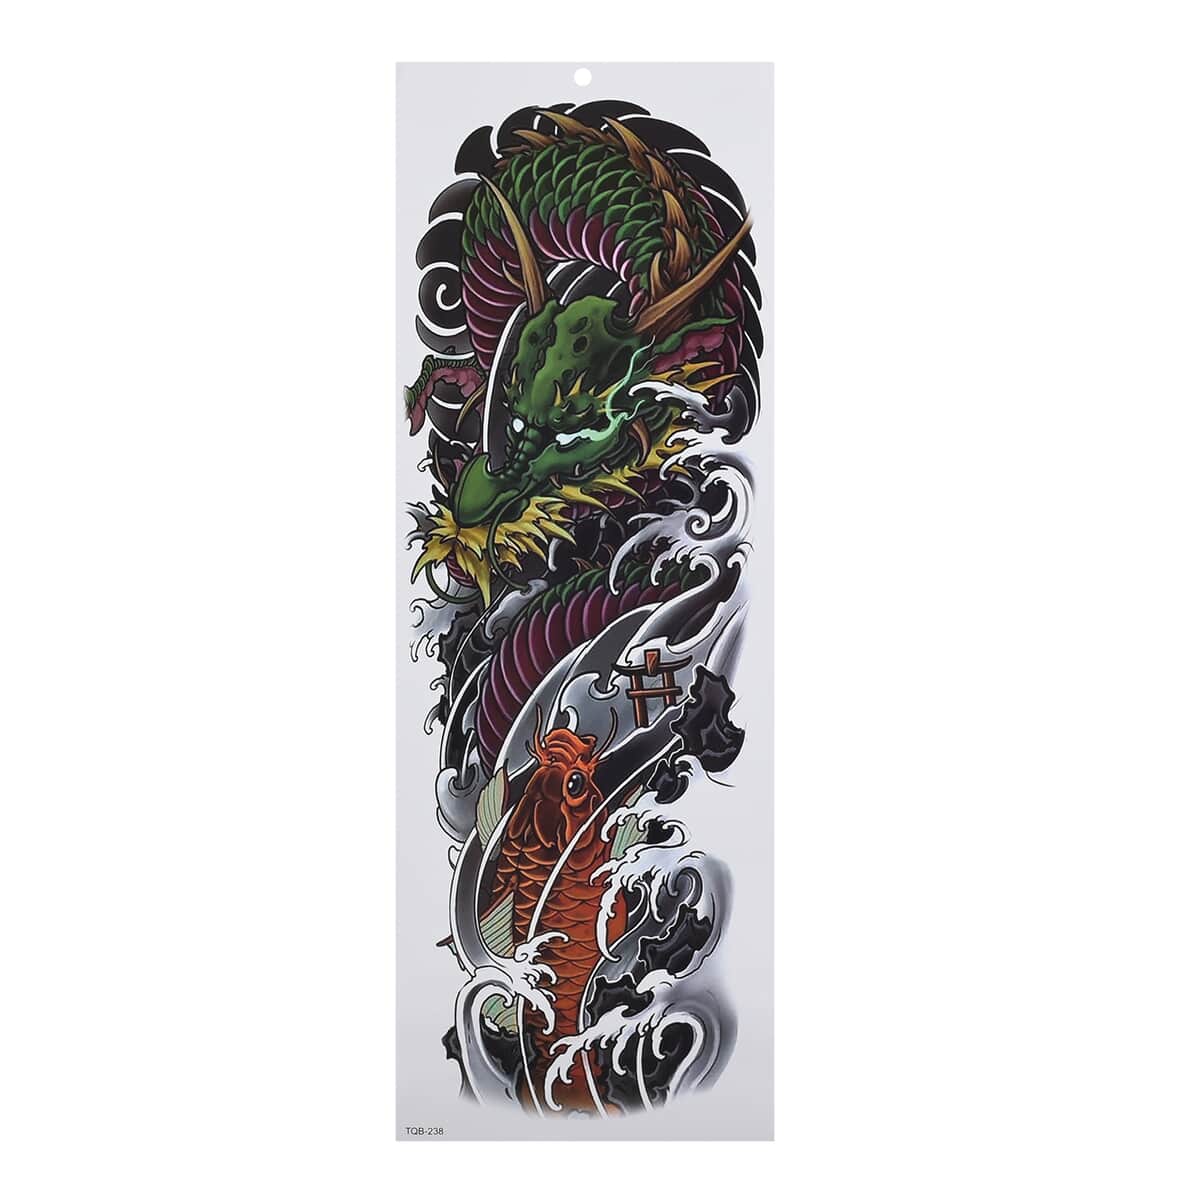 4 Sheets 3D Temporary Tattoo Stickers For Arms (18.9"x6.69") image number 6